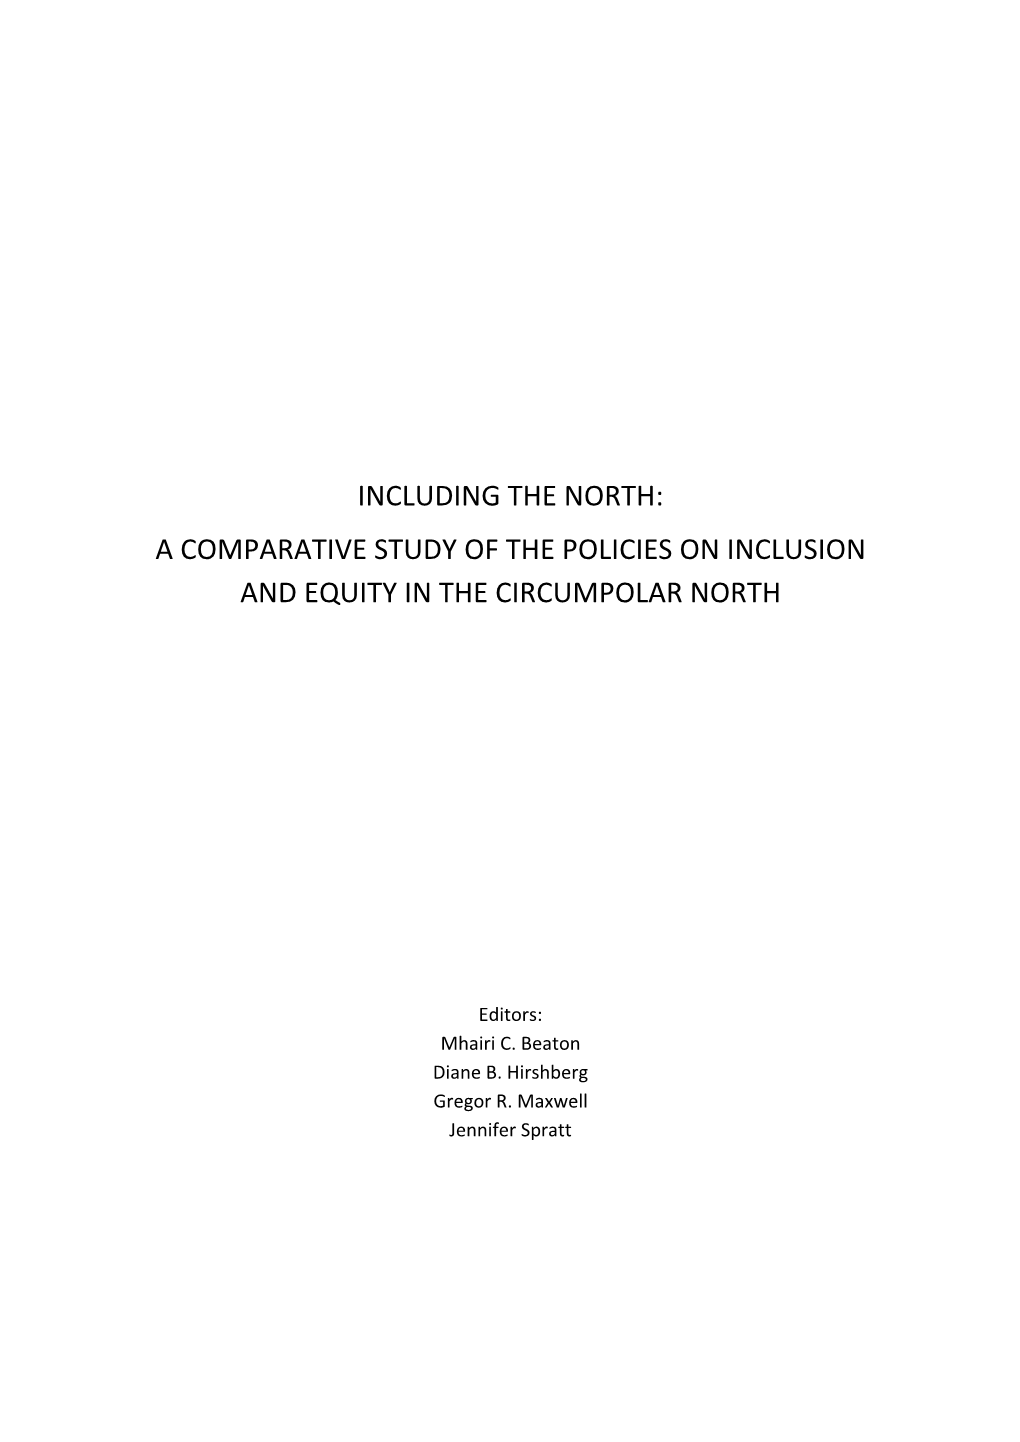 Including the North: a Comparative Study of the Policies on Inclusion and Equity in the Circumpolar North